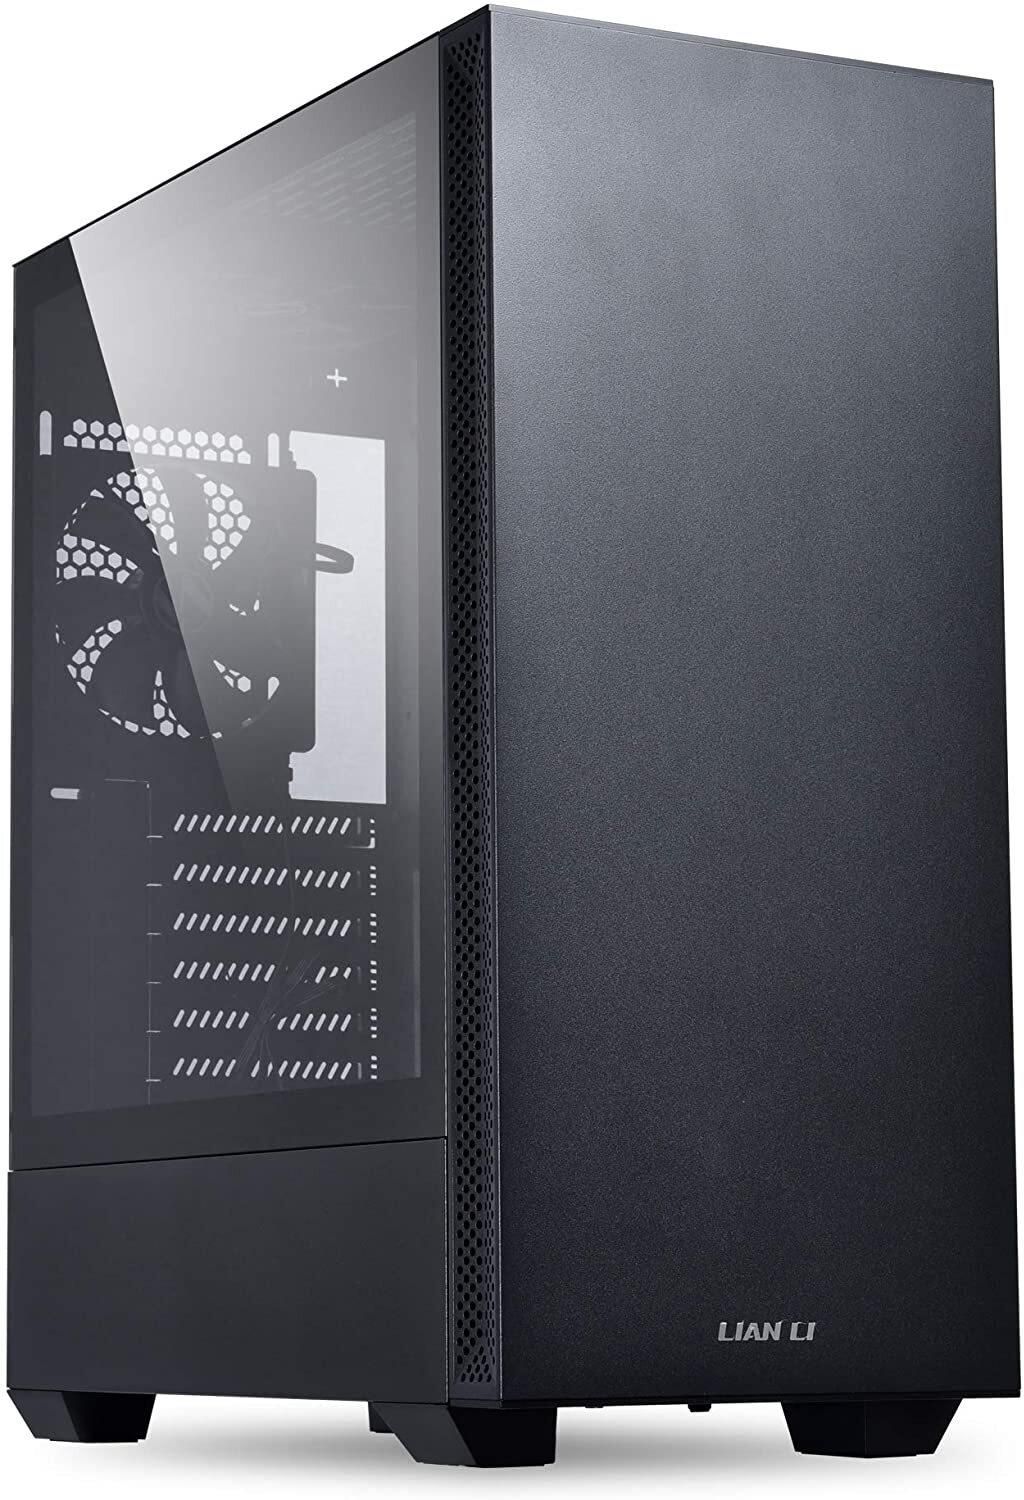 Lian Li Mid-Tower Chassis ATX Computer Case PC Gaming Case W/Tempered Glass Side Panel, Water-Cooling Ready, Side Ventilation And 2X120mm Fan Pre-Installed (Lancool 205, Black)